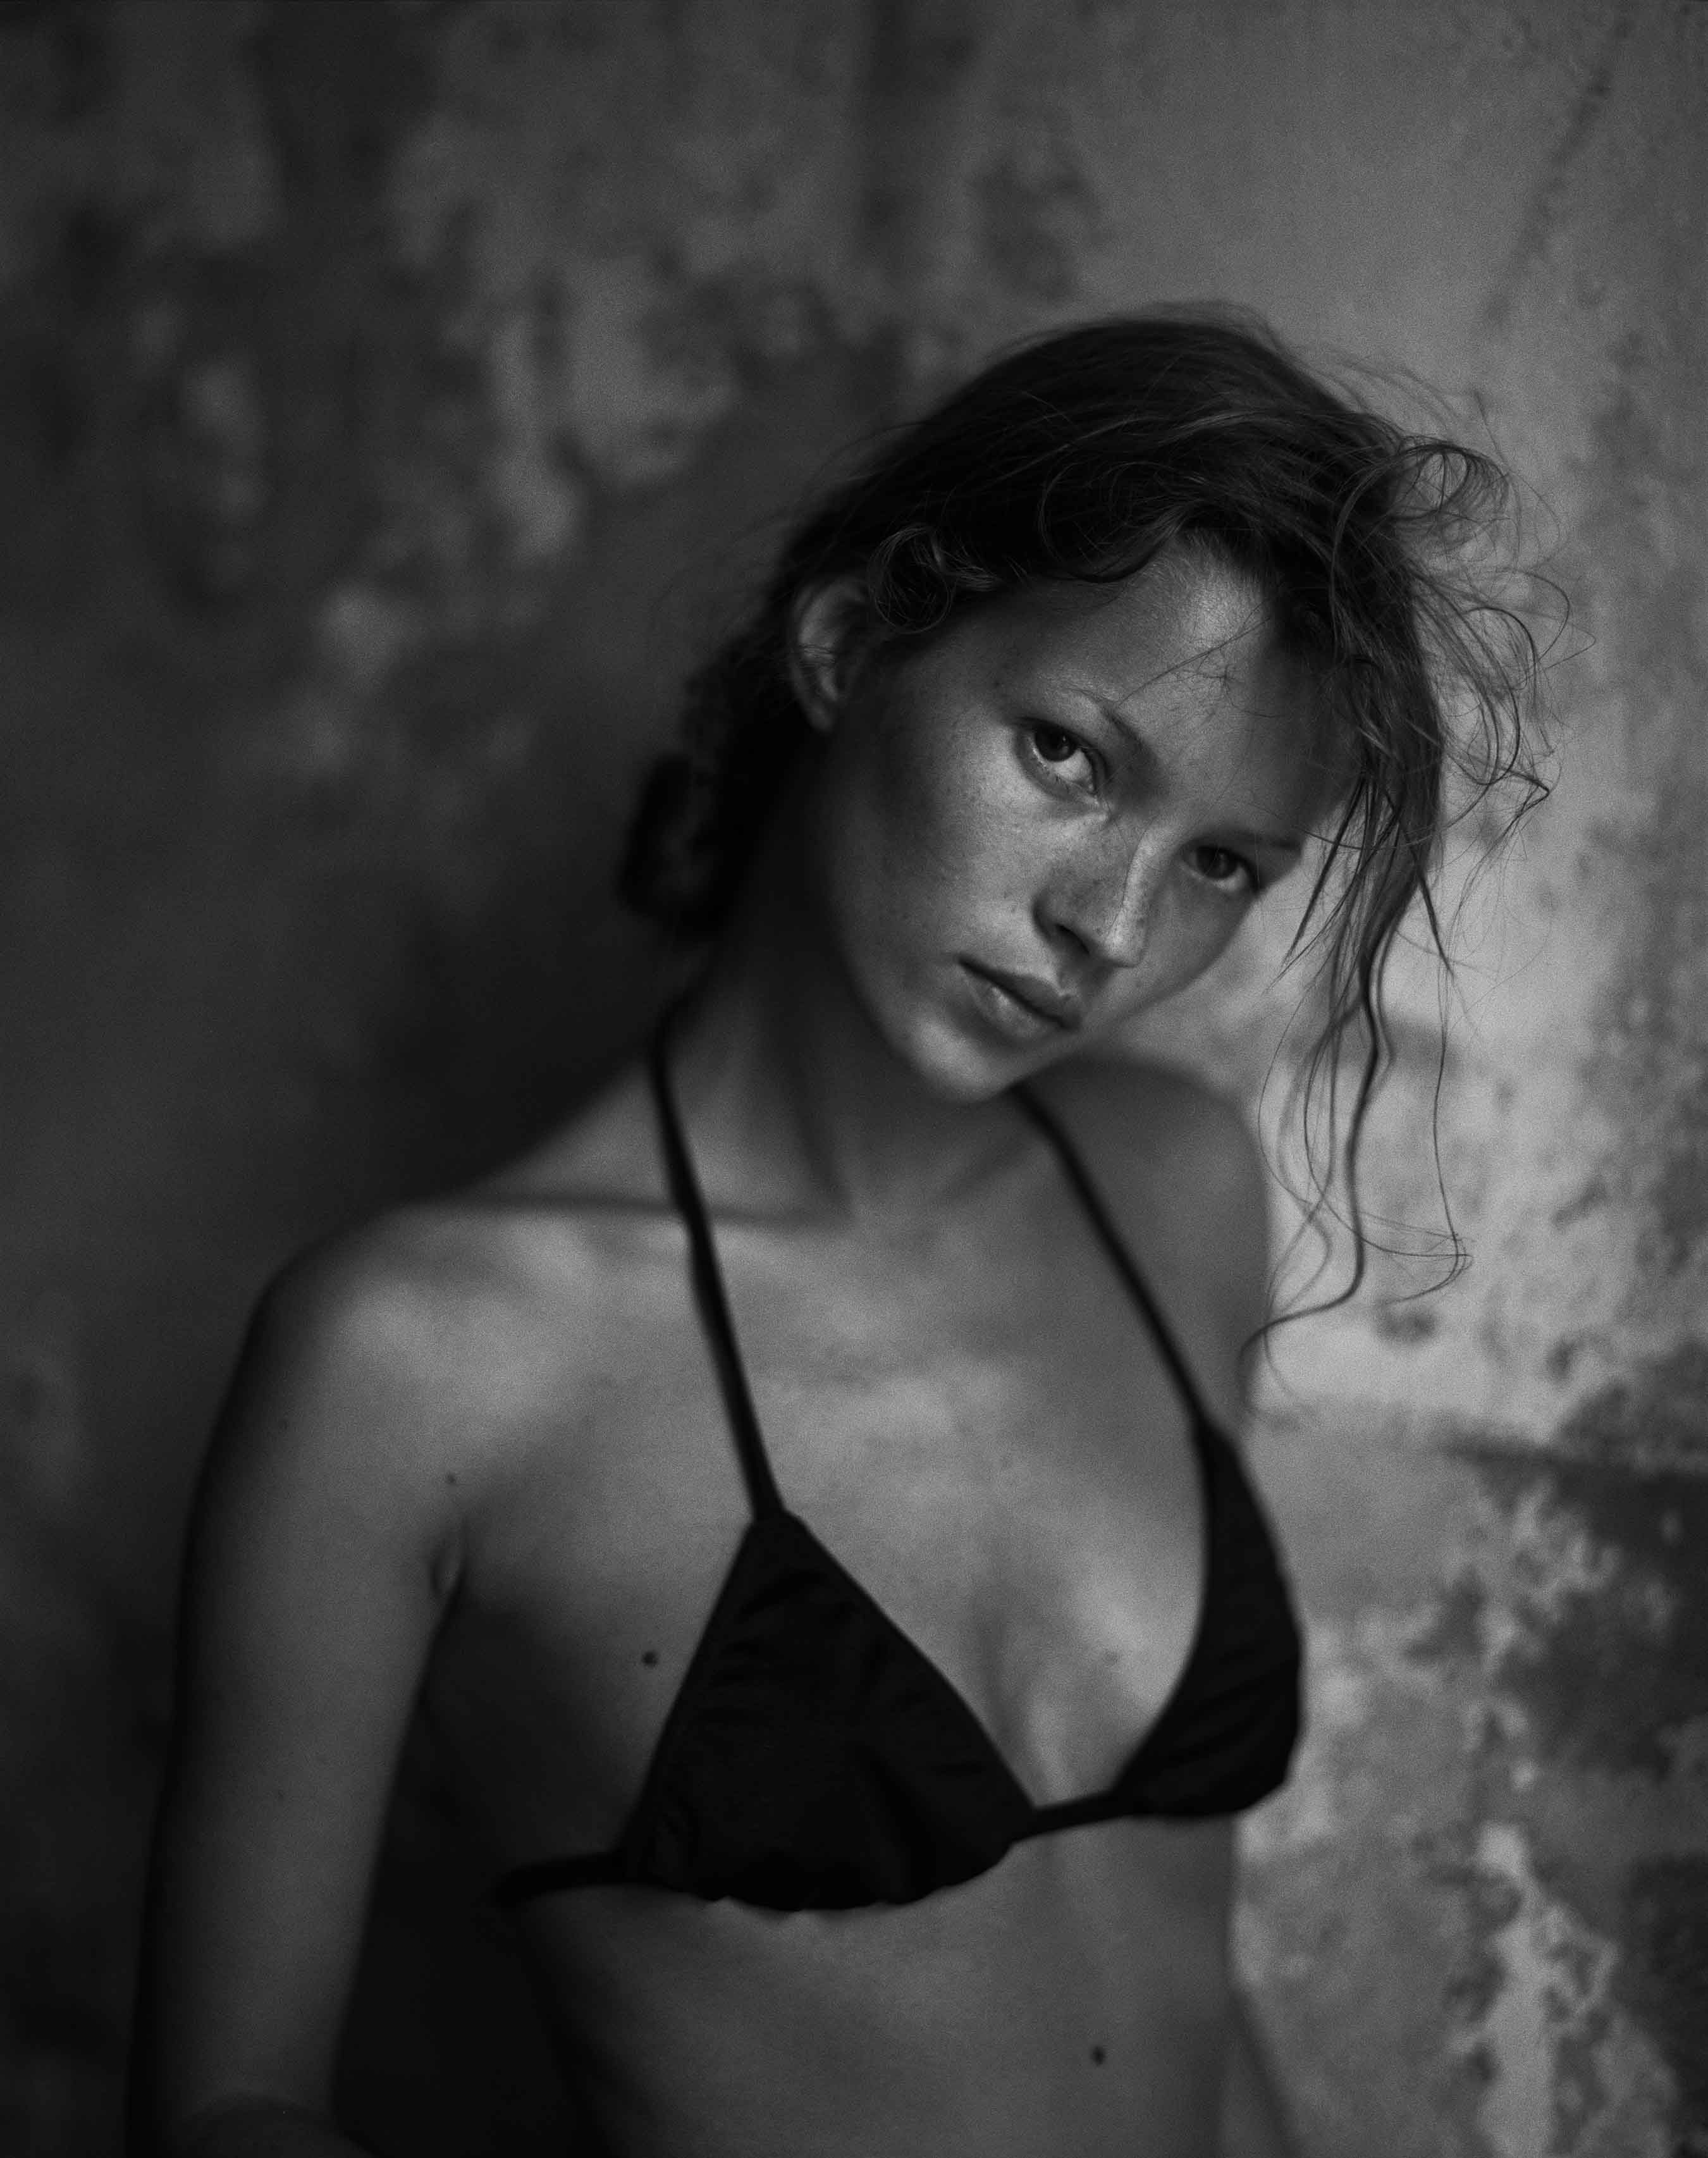 Kate Moss print proves collectible at Phillips